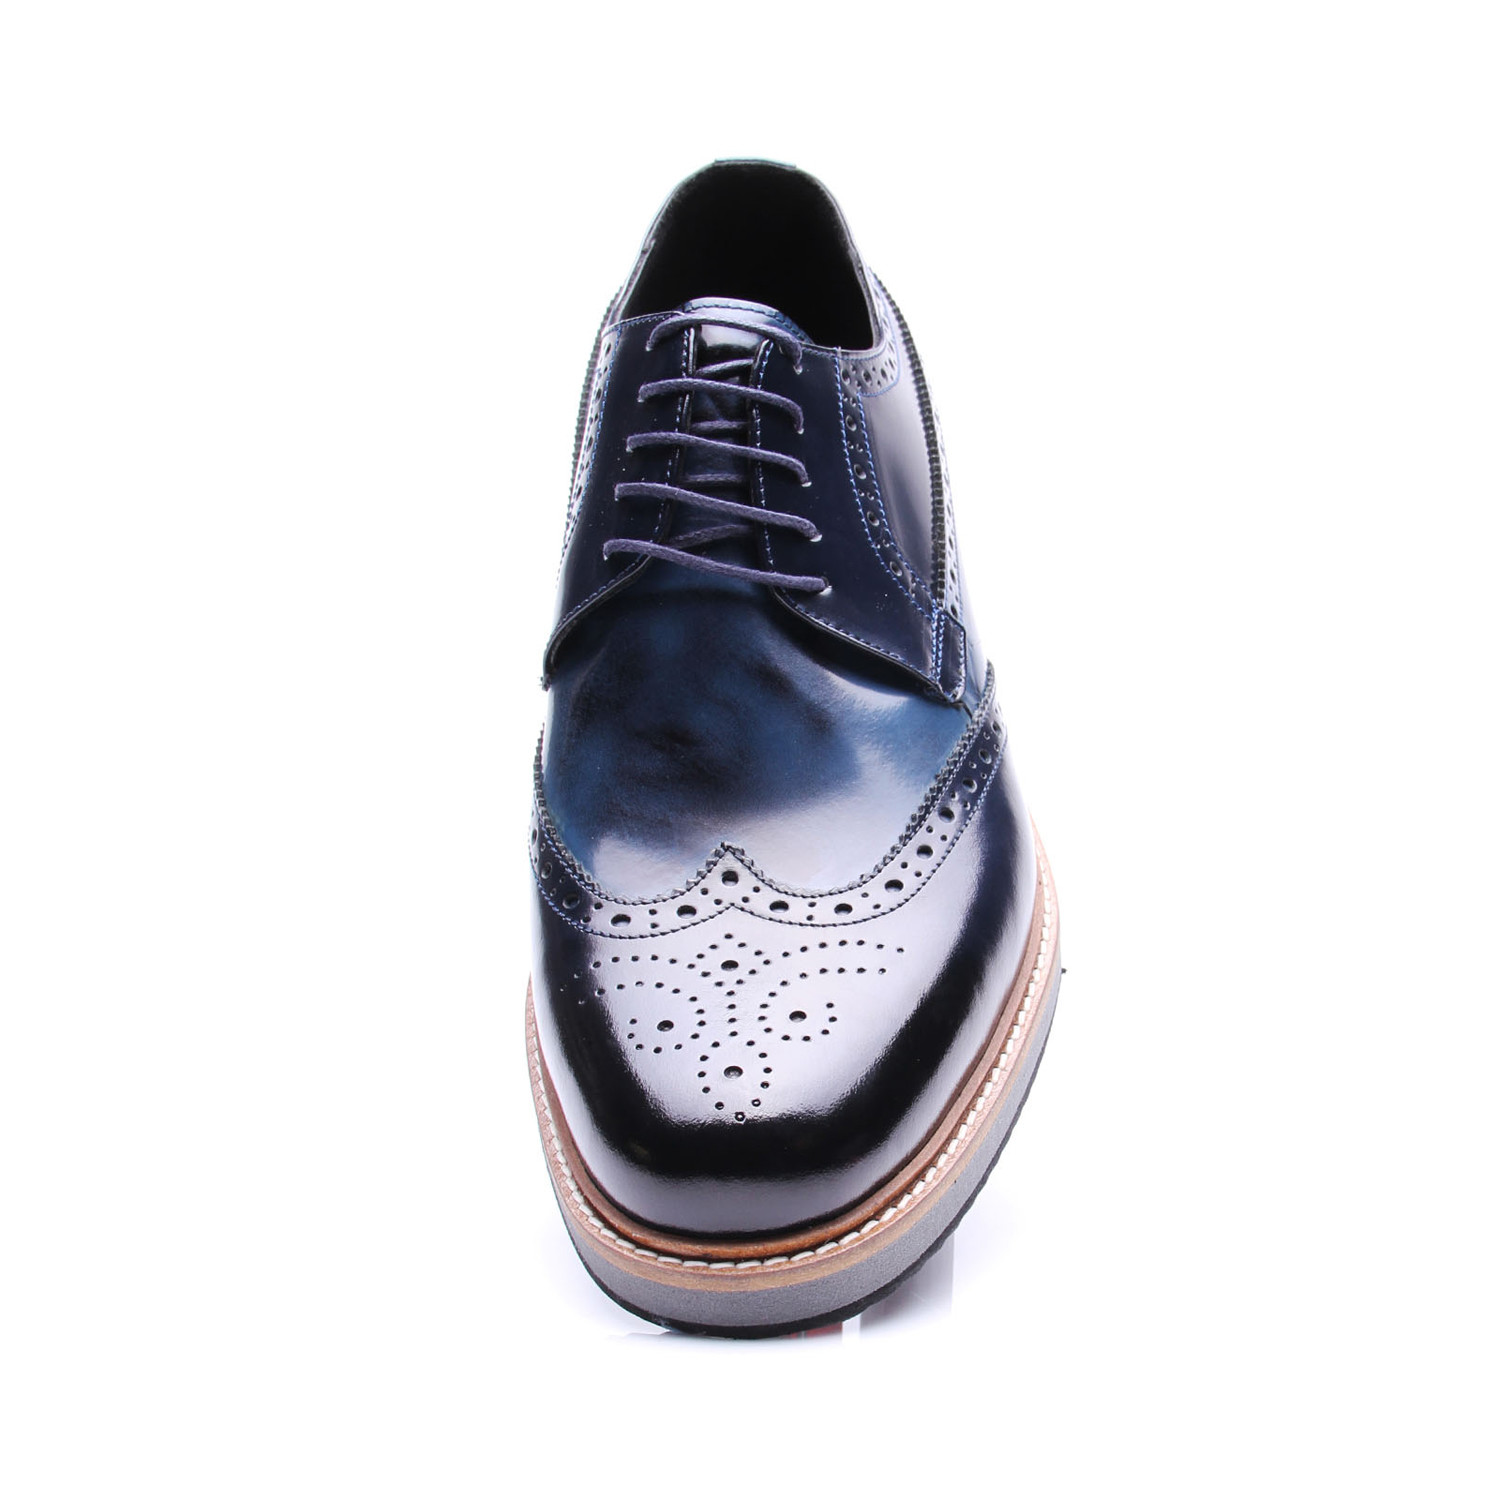 Medallion Wing-Tip Shoe // Dark Blue (Euro: 39) - Reprise - Touch of Modern